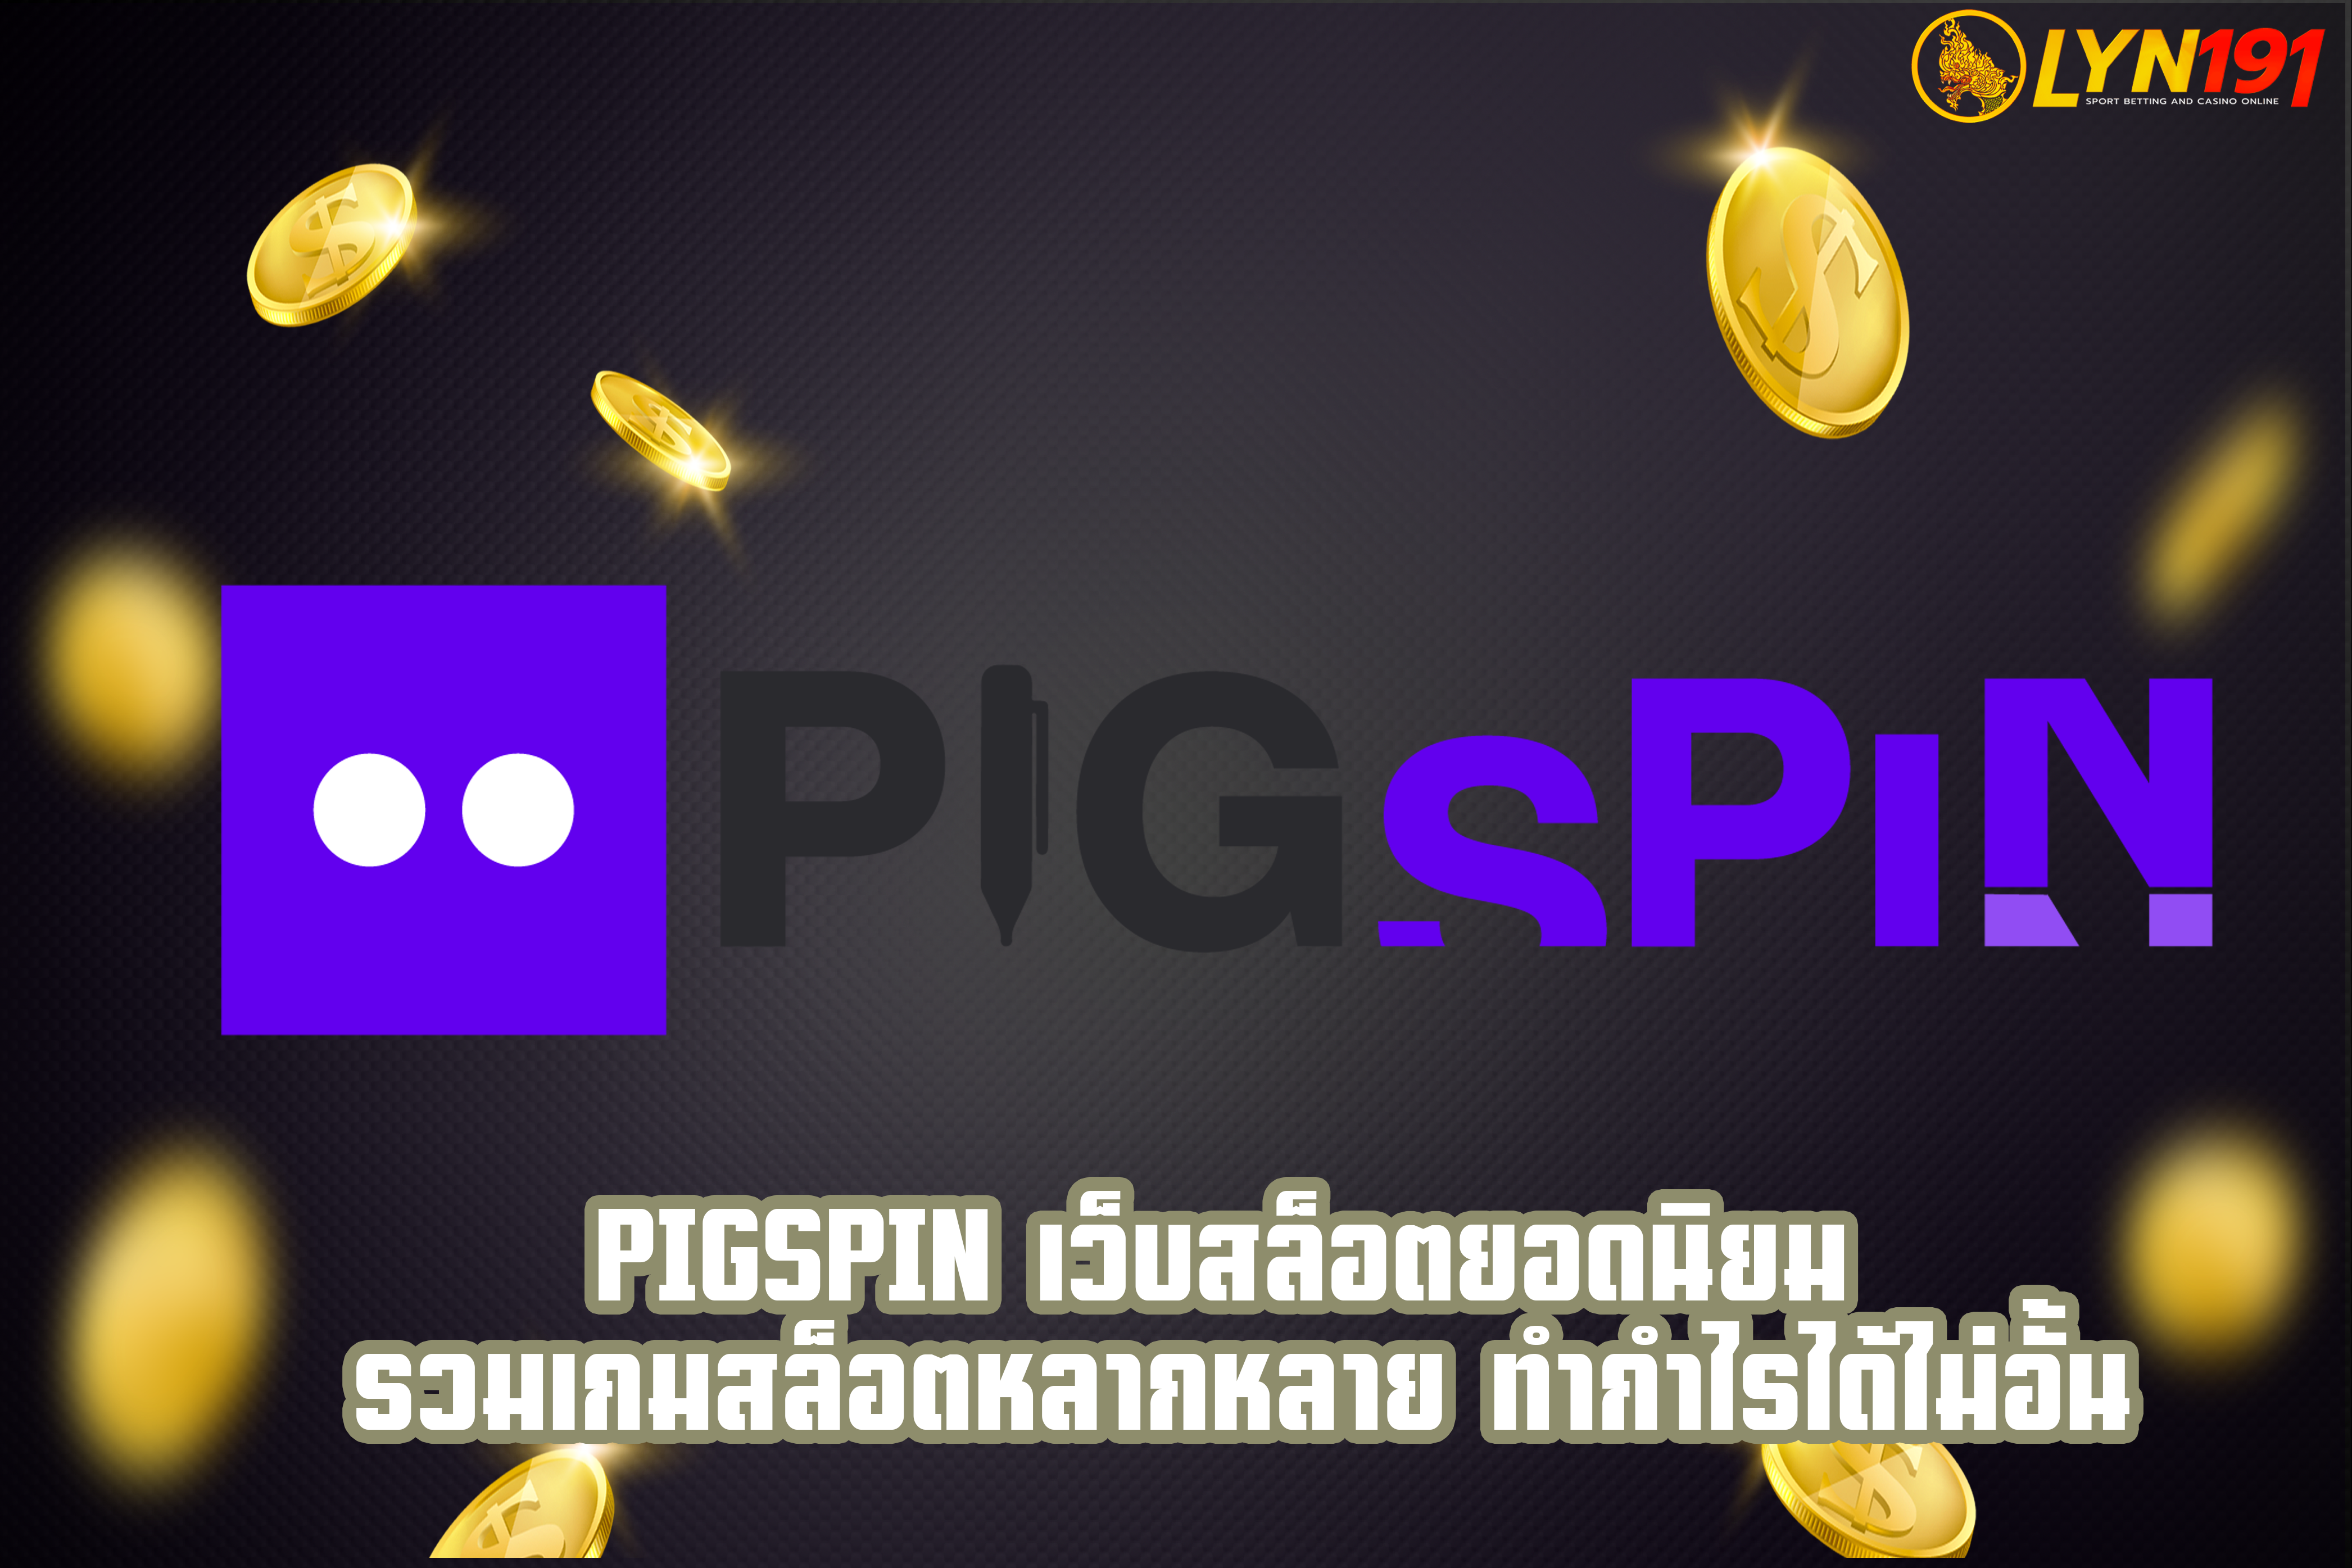 PIGSPIN